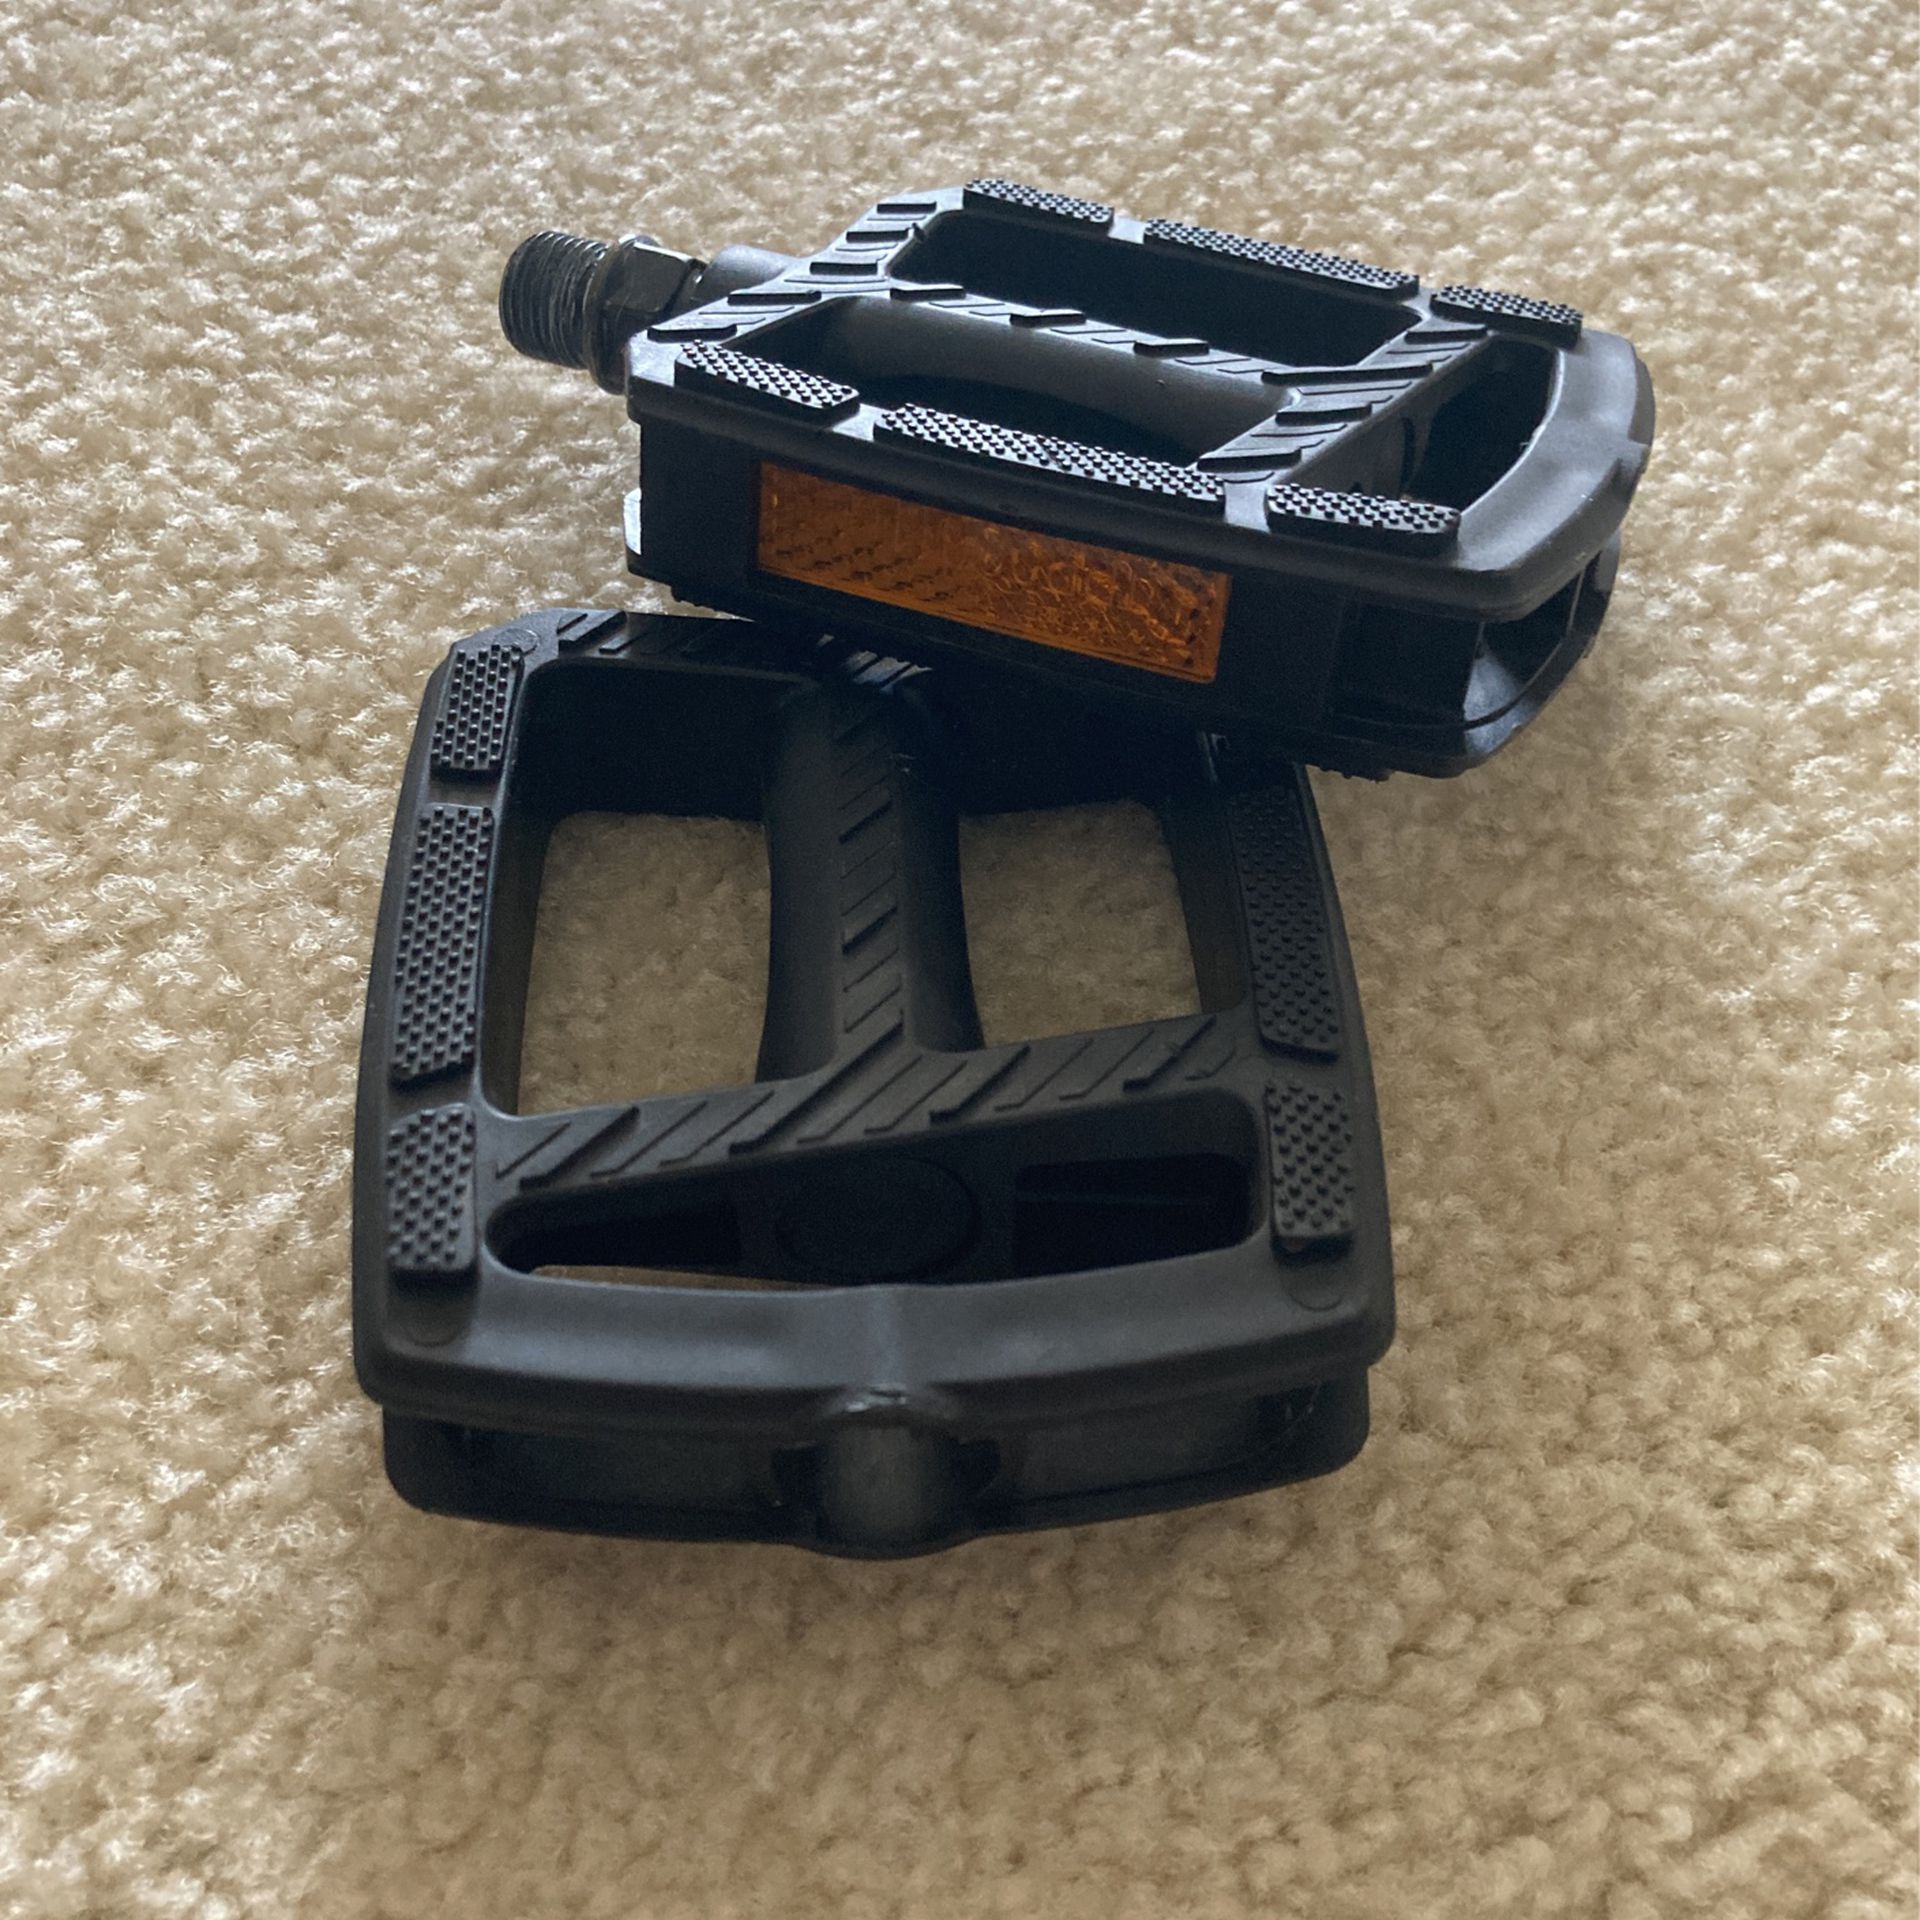 Standard bicycle pedals never used.